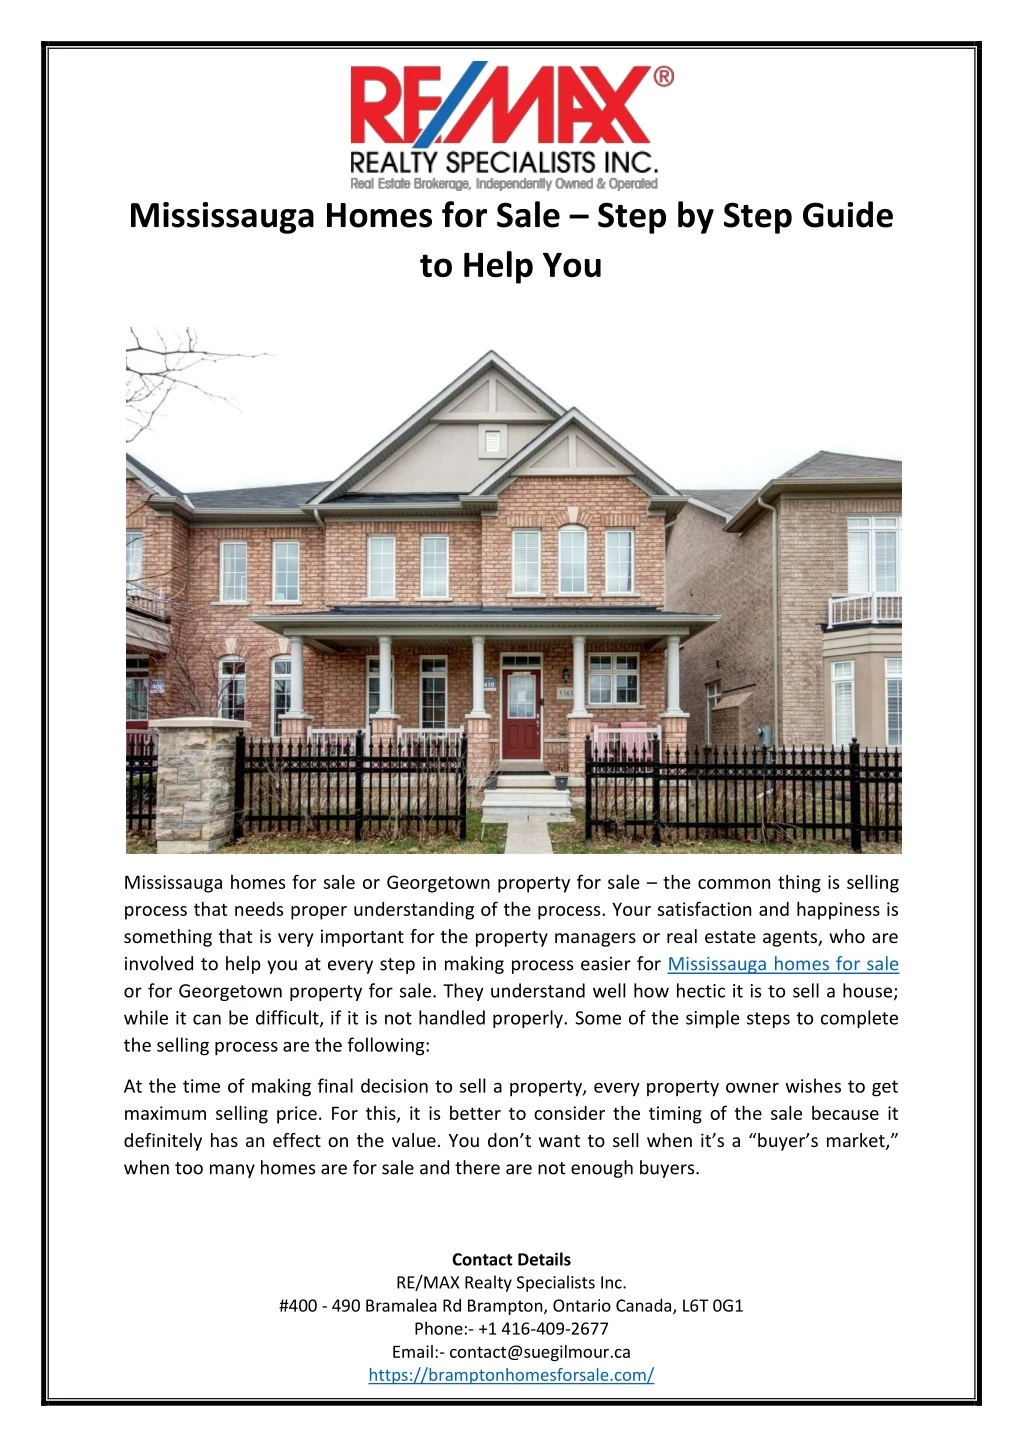 mississauga homes for sale step by step guide